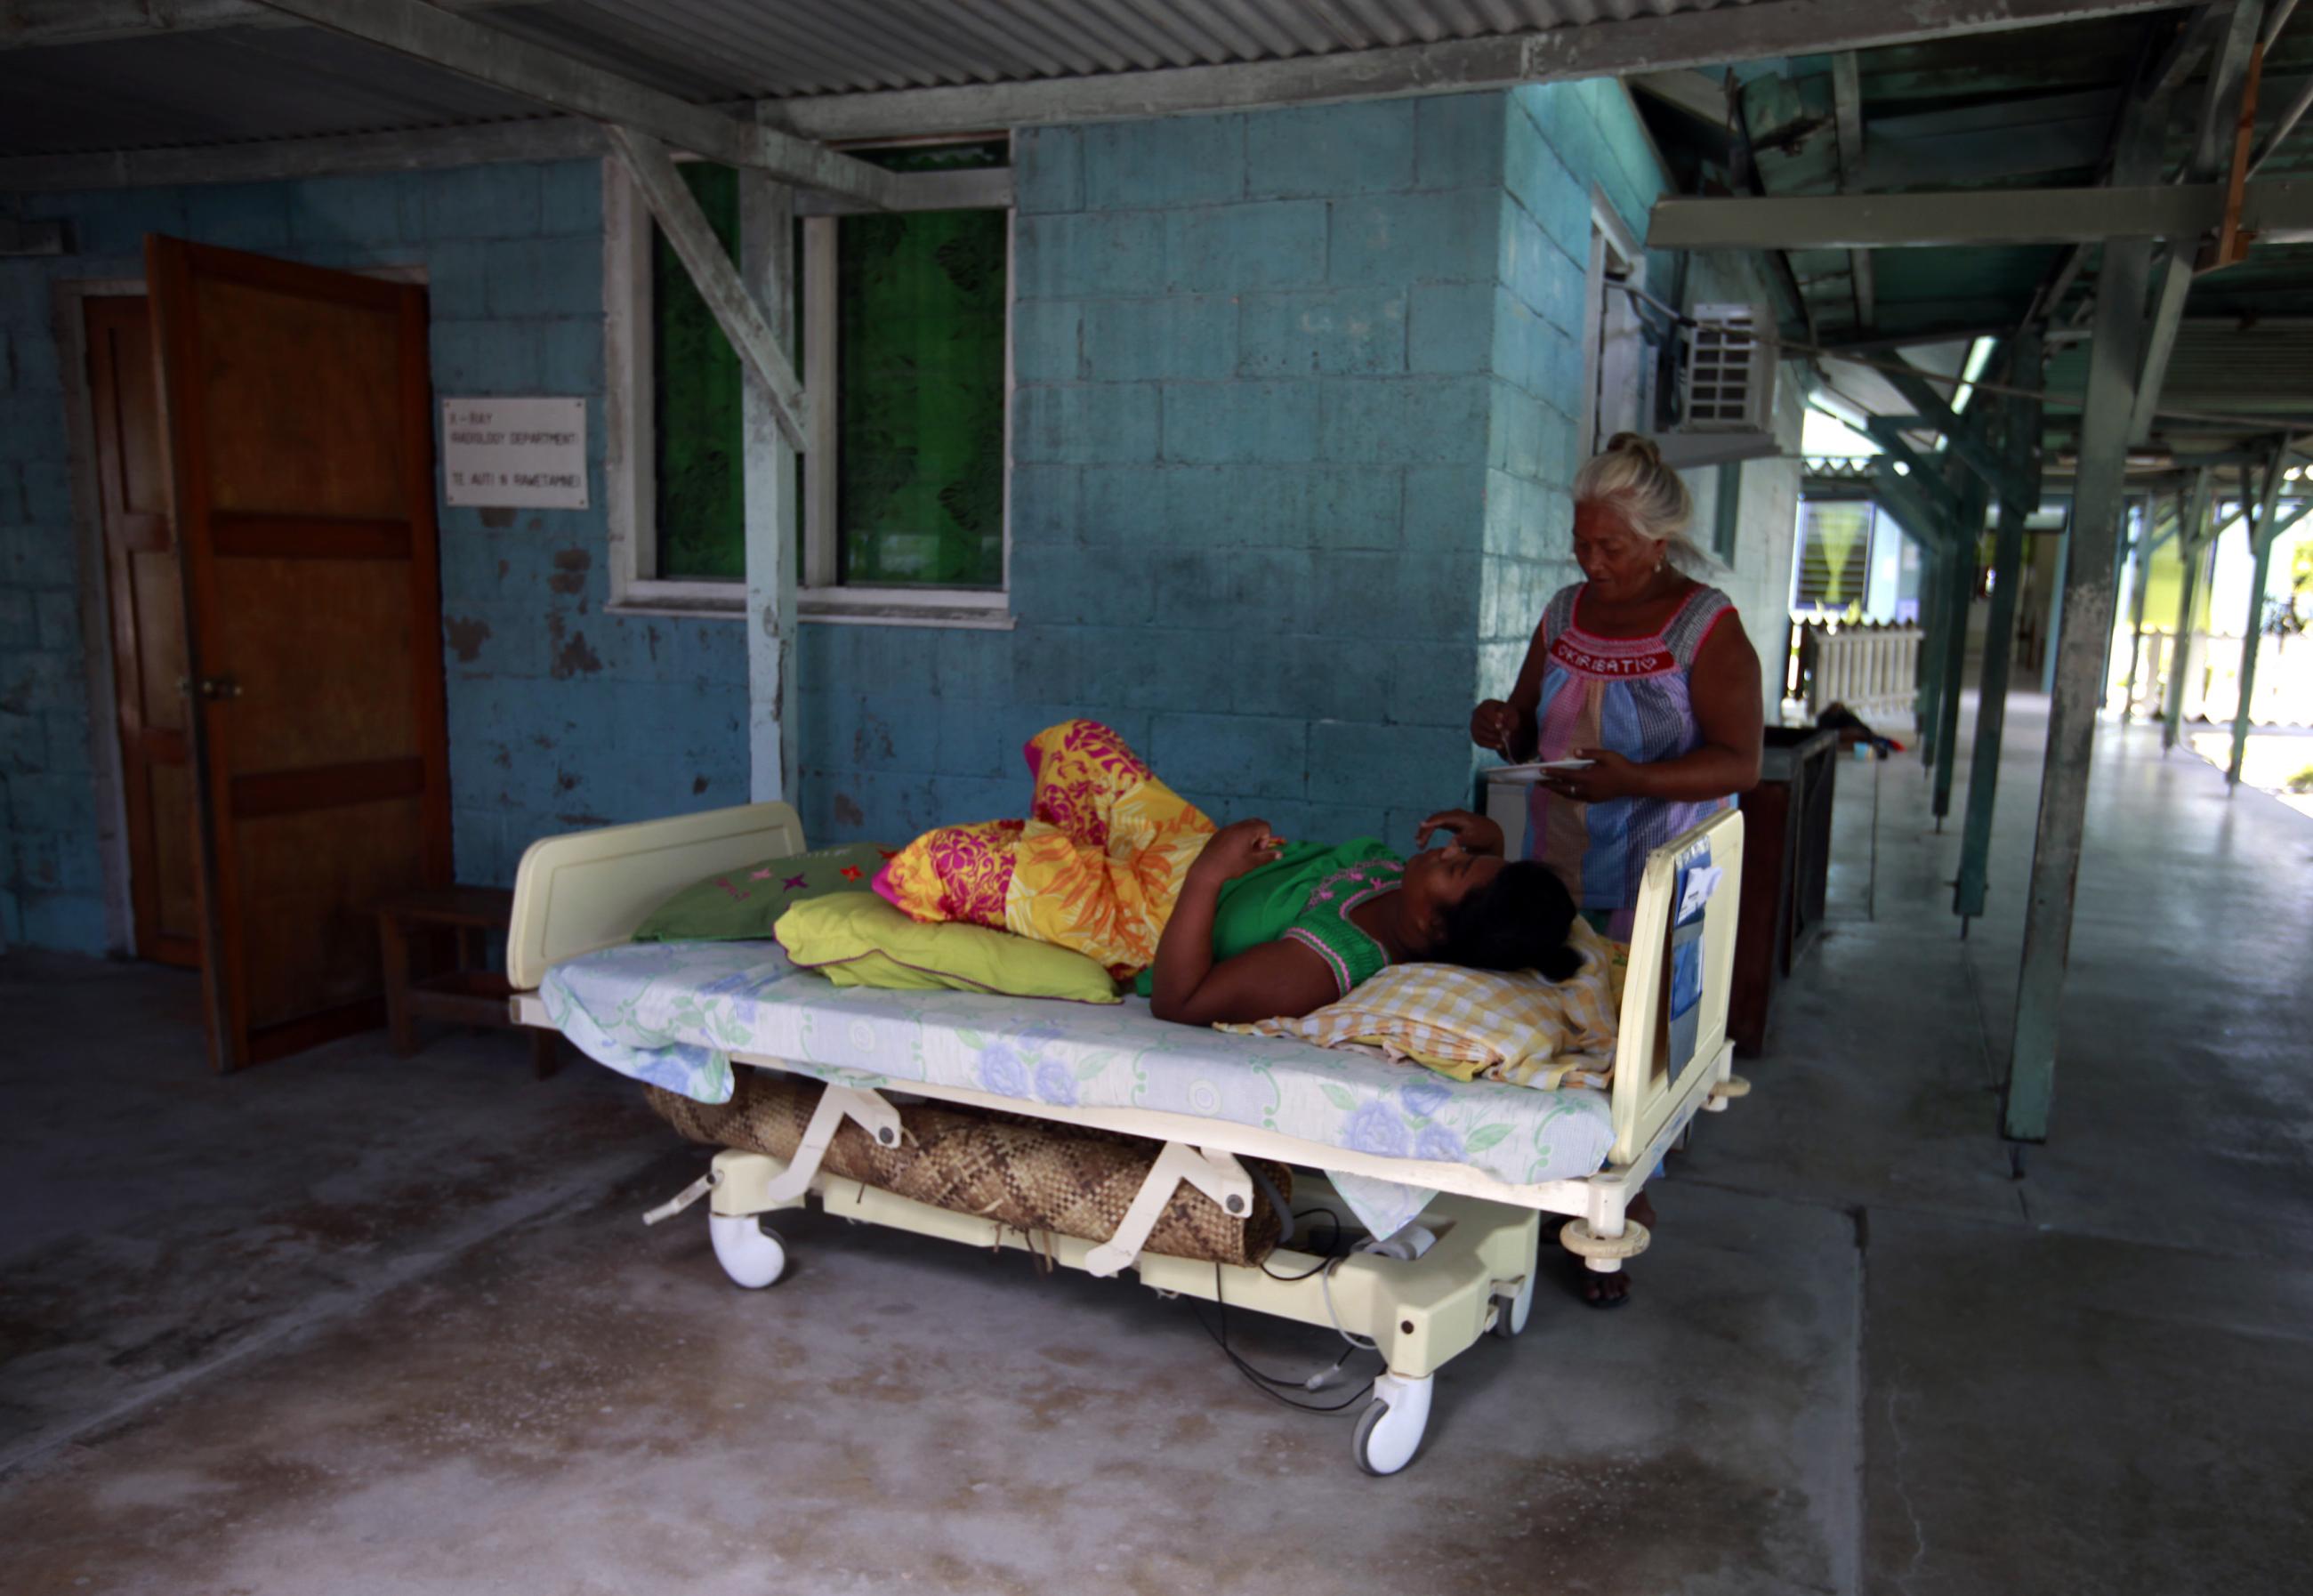 A woman prepares to feed a patient on a bed, placed outside due to lack of space.